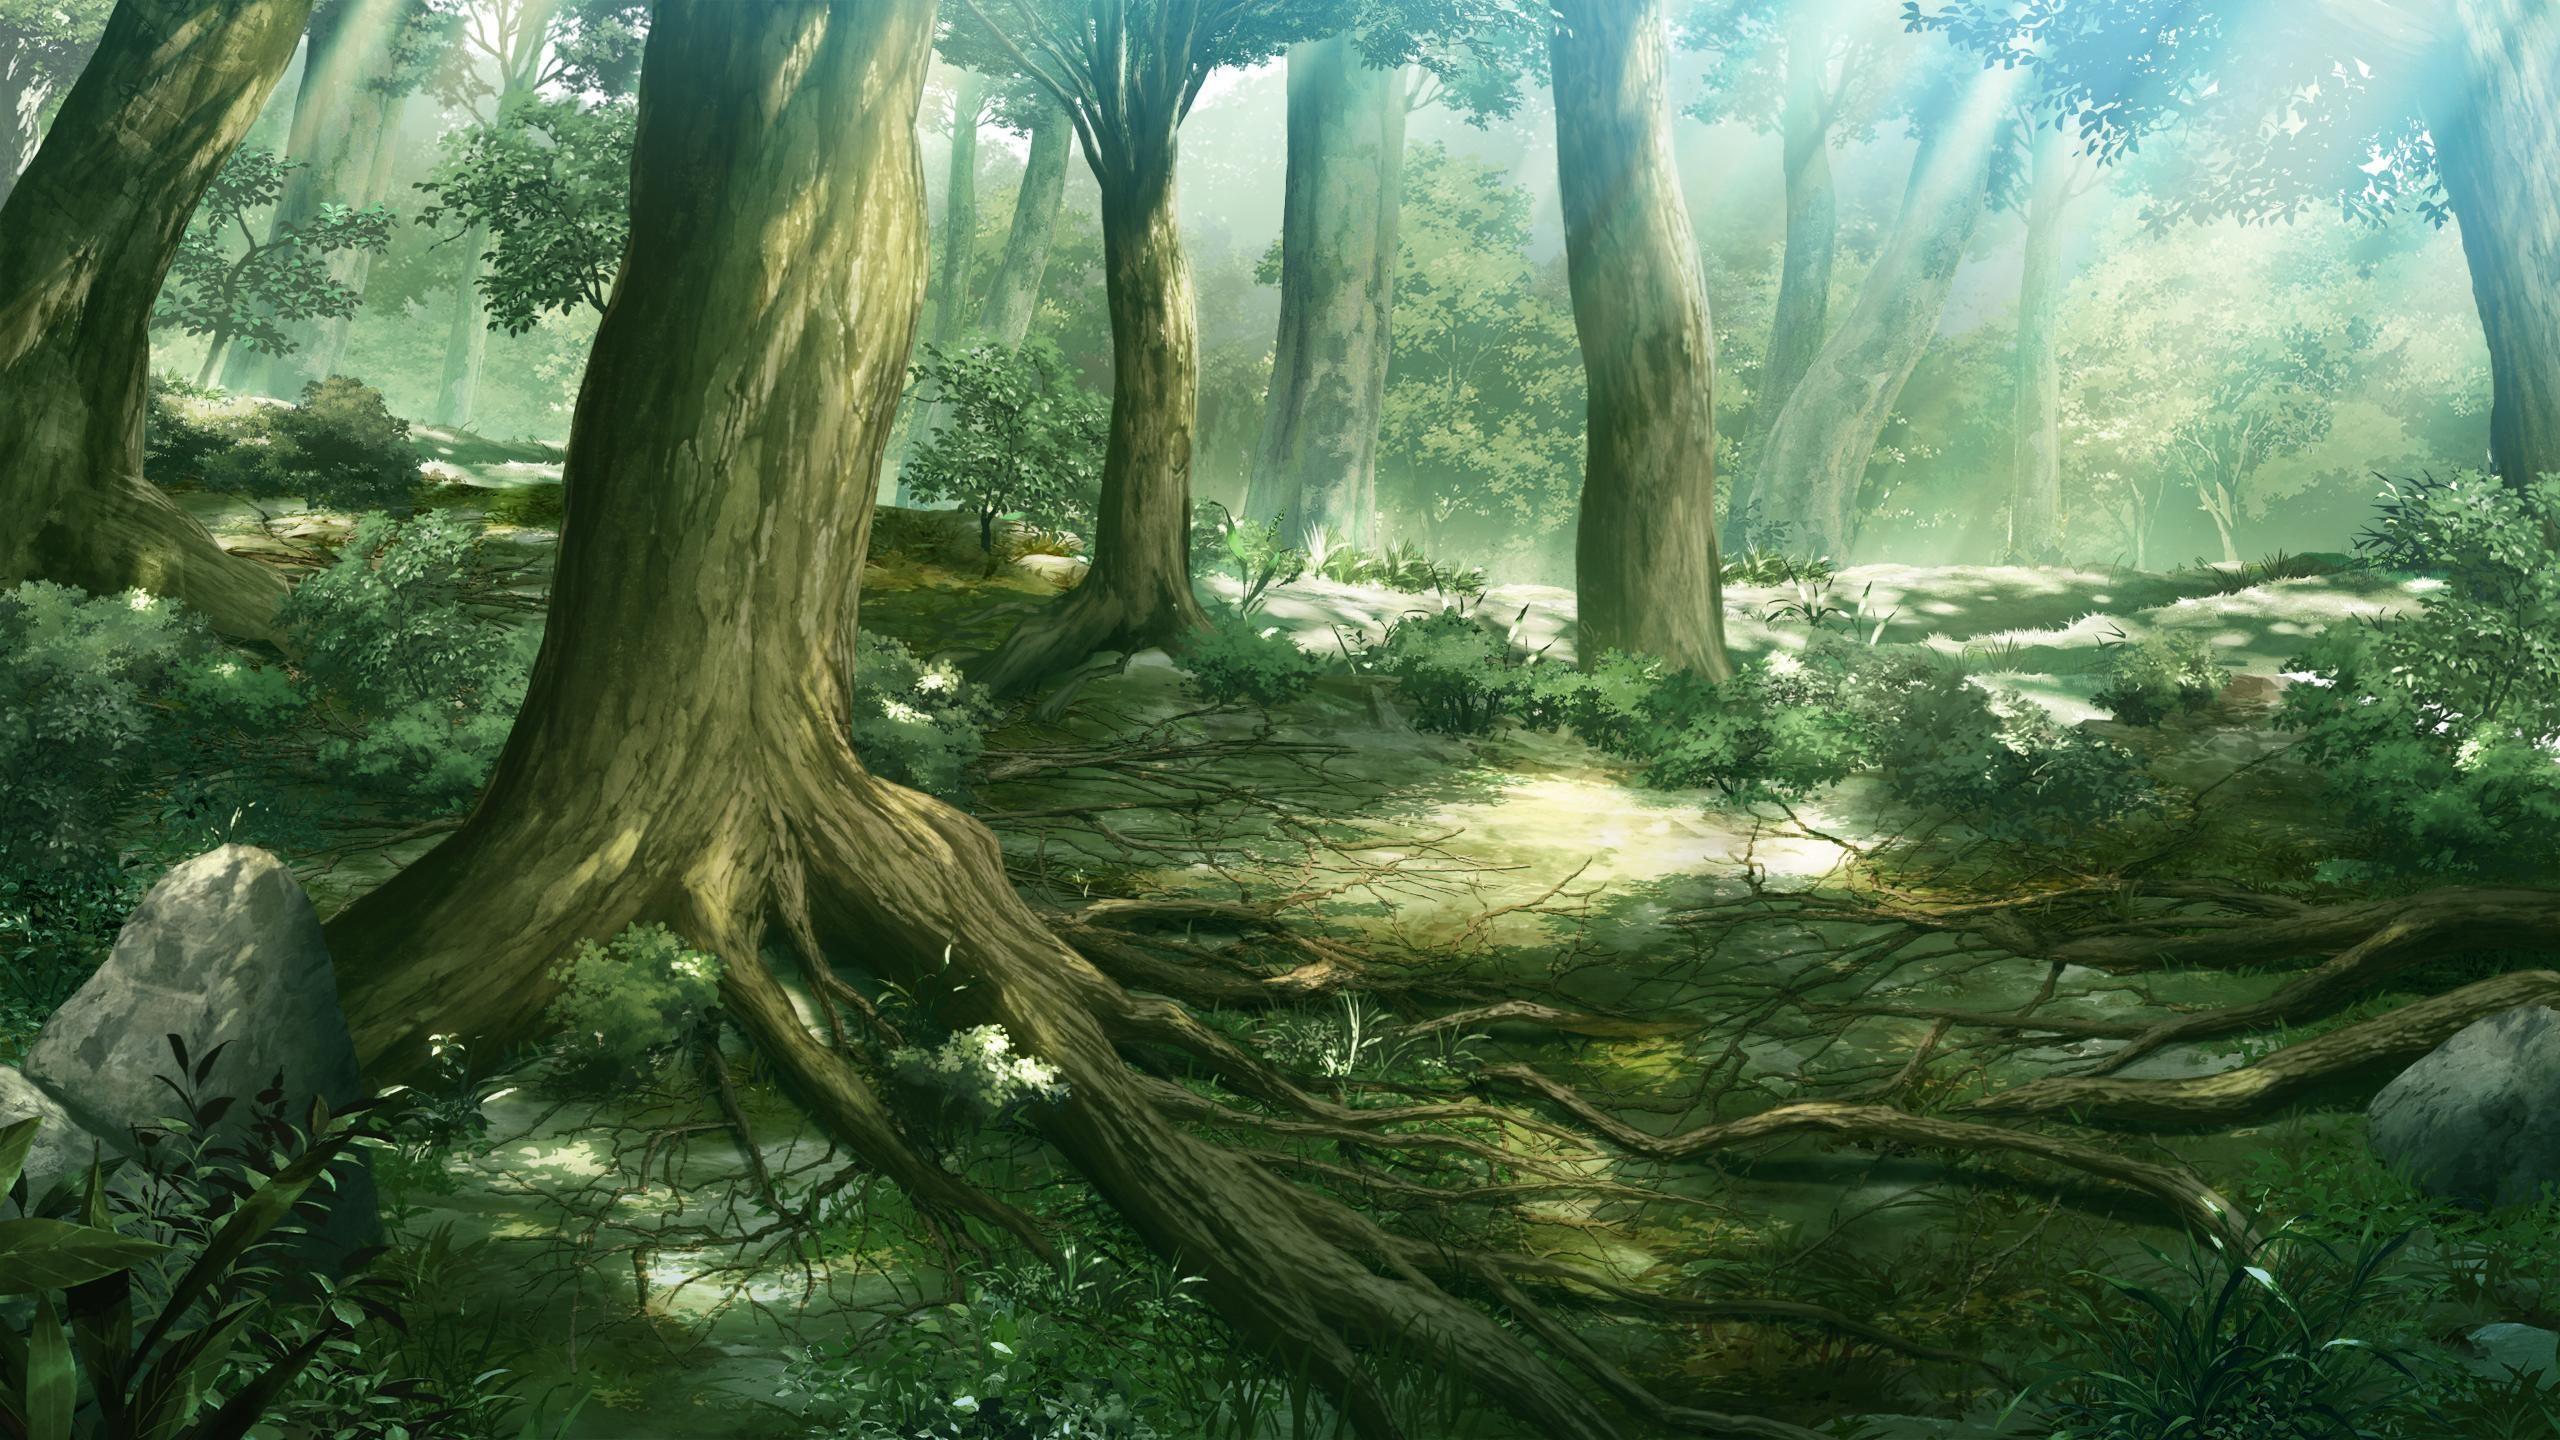 573362 1920x1080 anime artwork forest nature life trees wallpaper JPG 638  kB  Rare Gallery HD Wallpapers